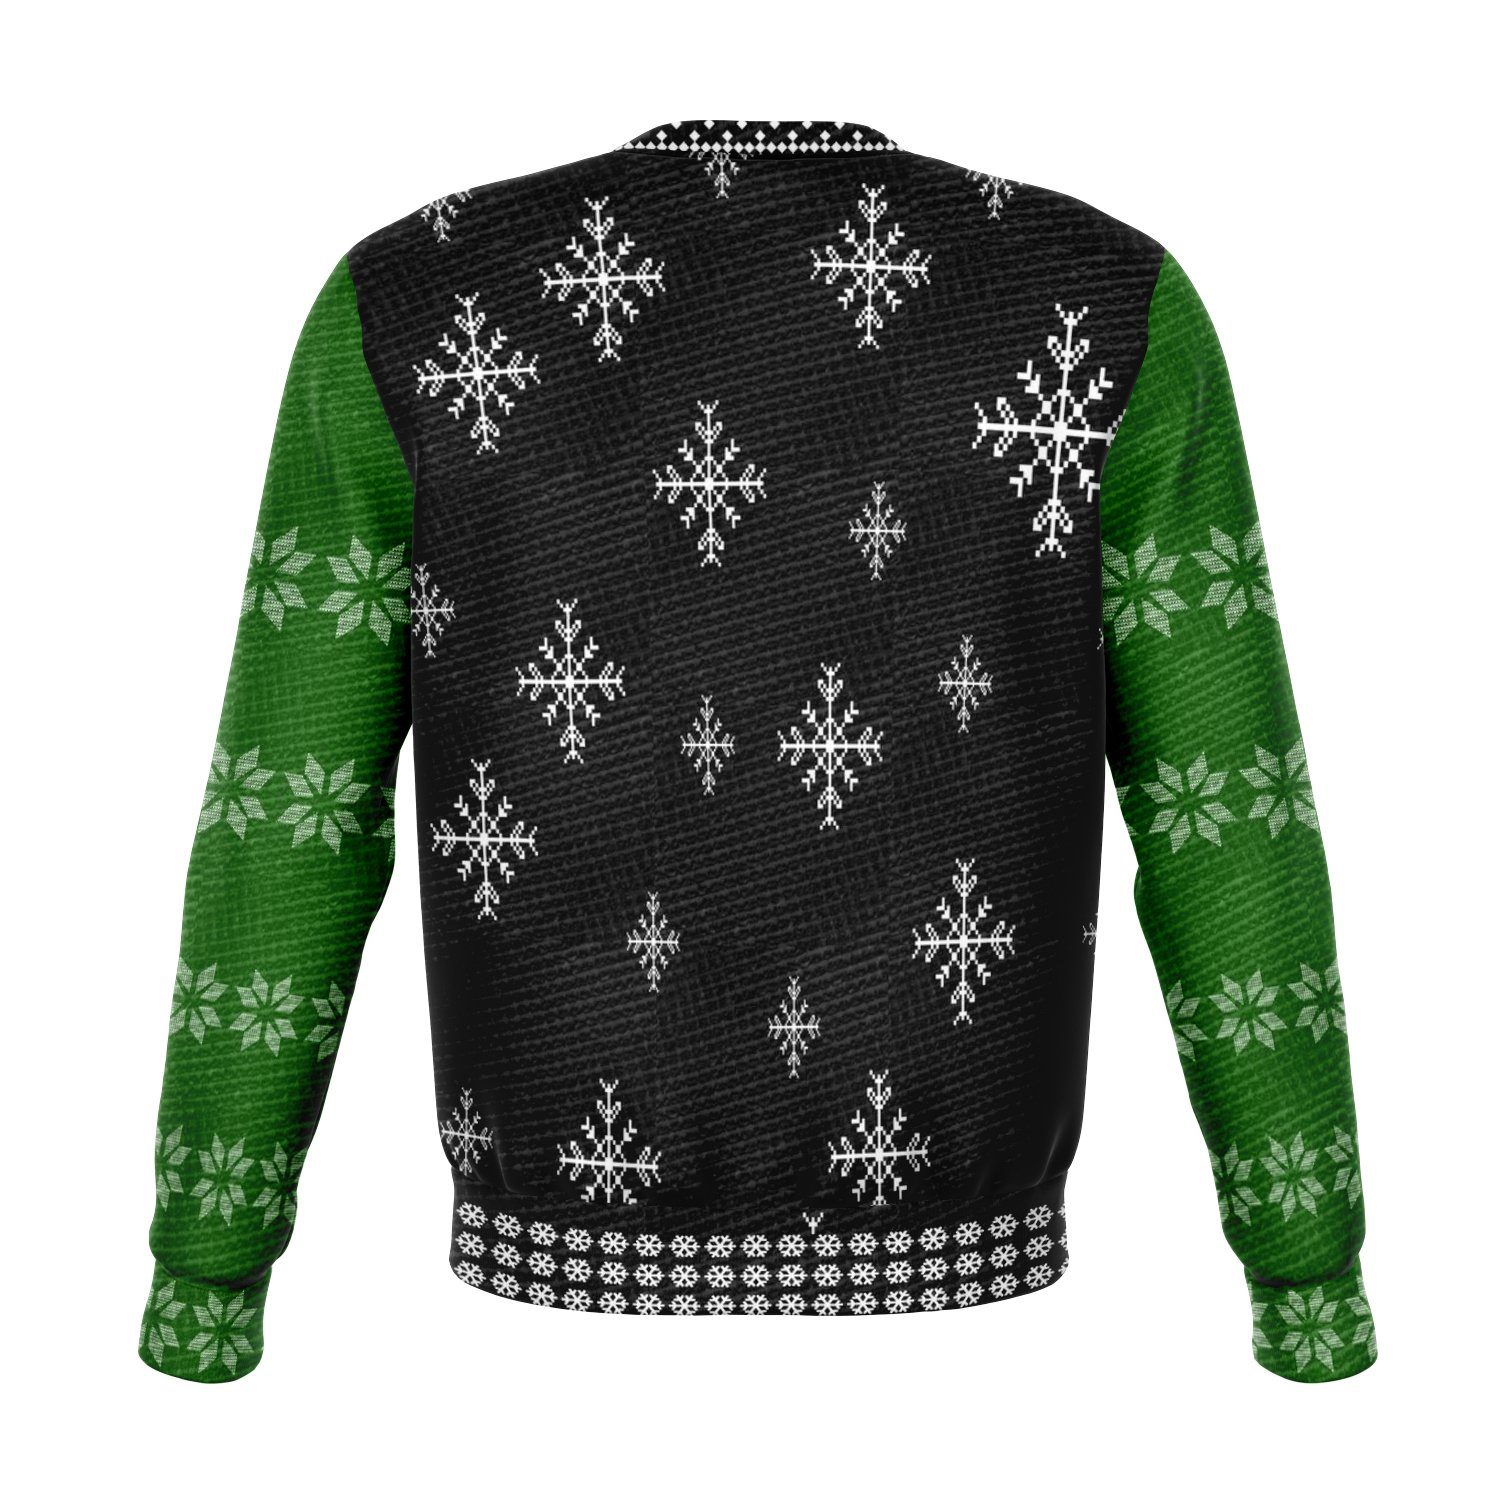 Inktee Store - Santa Paws Ugly Christmas Sweater Image